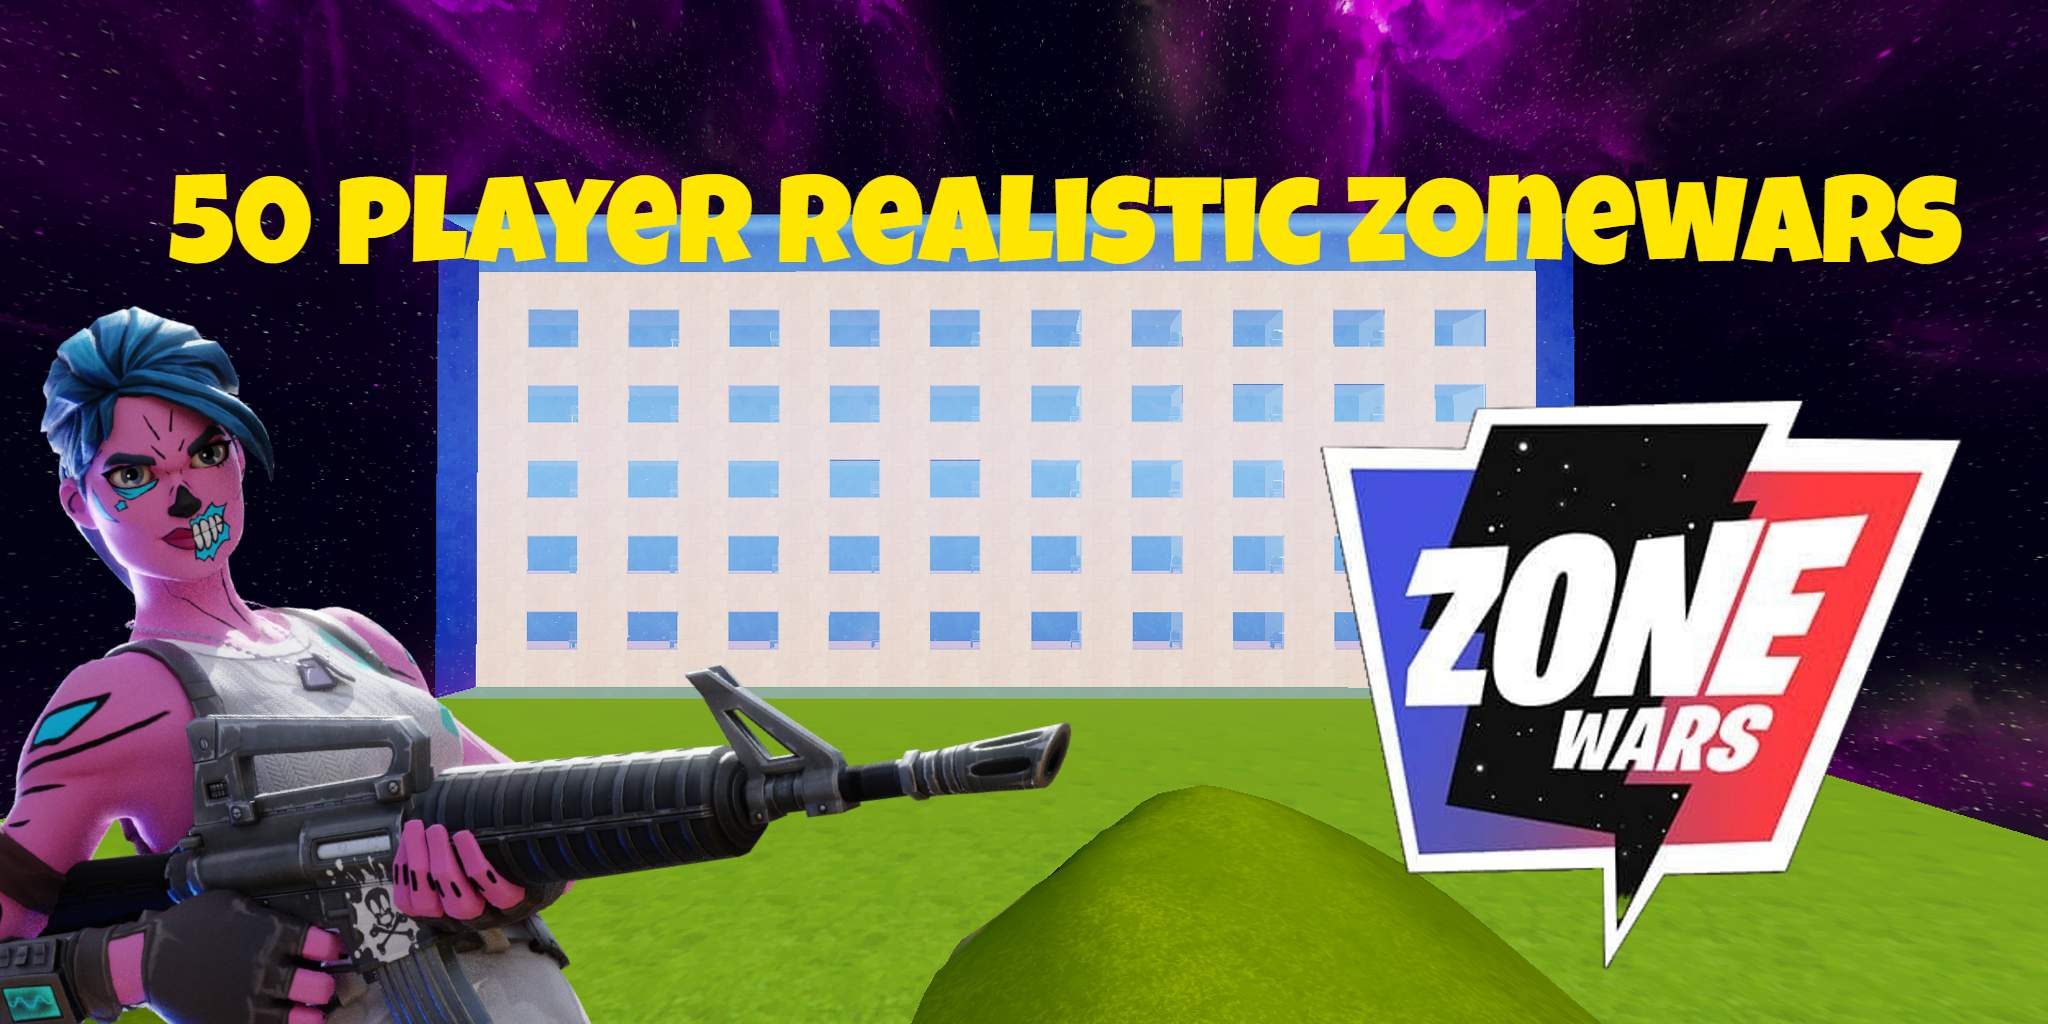 50 Player Realistic Zone Wars image 2